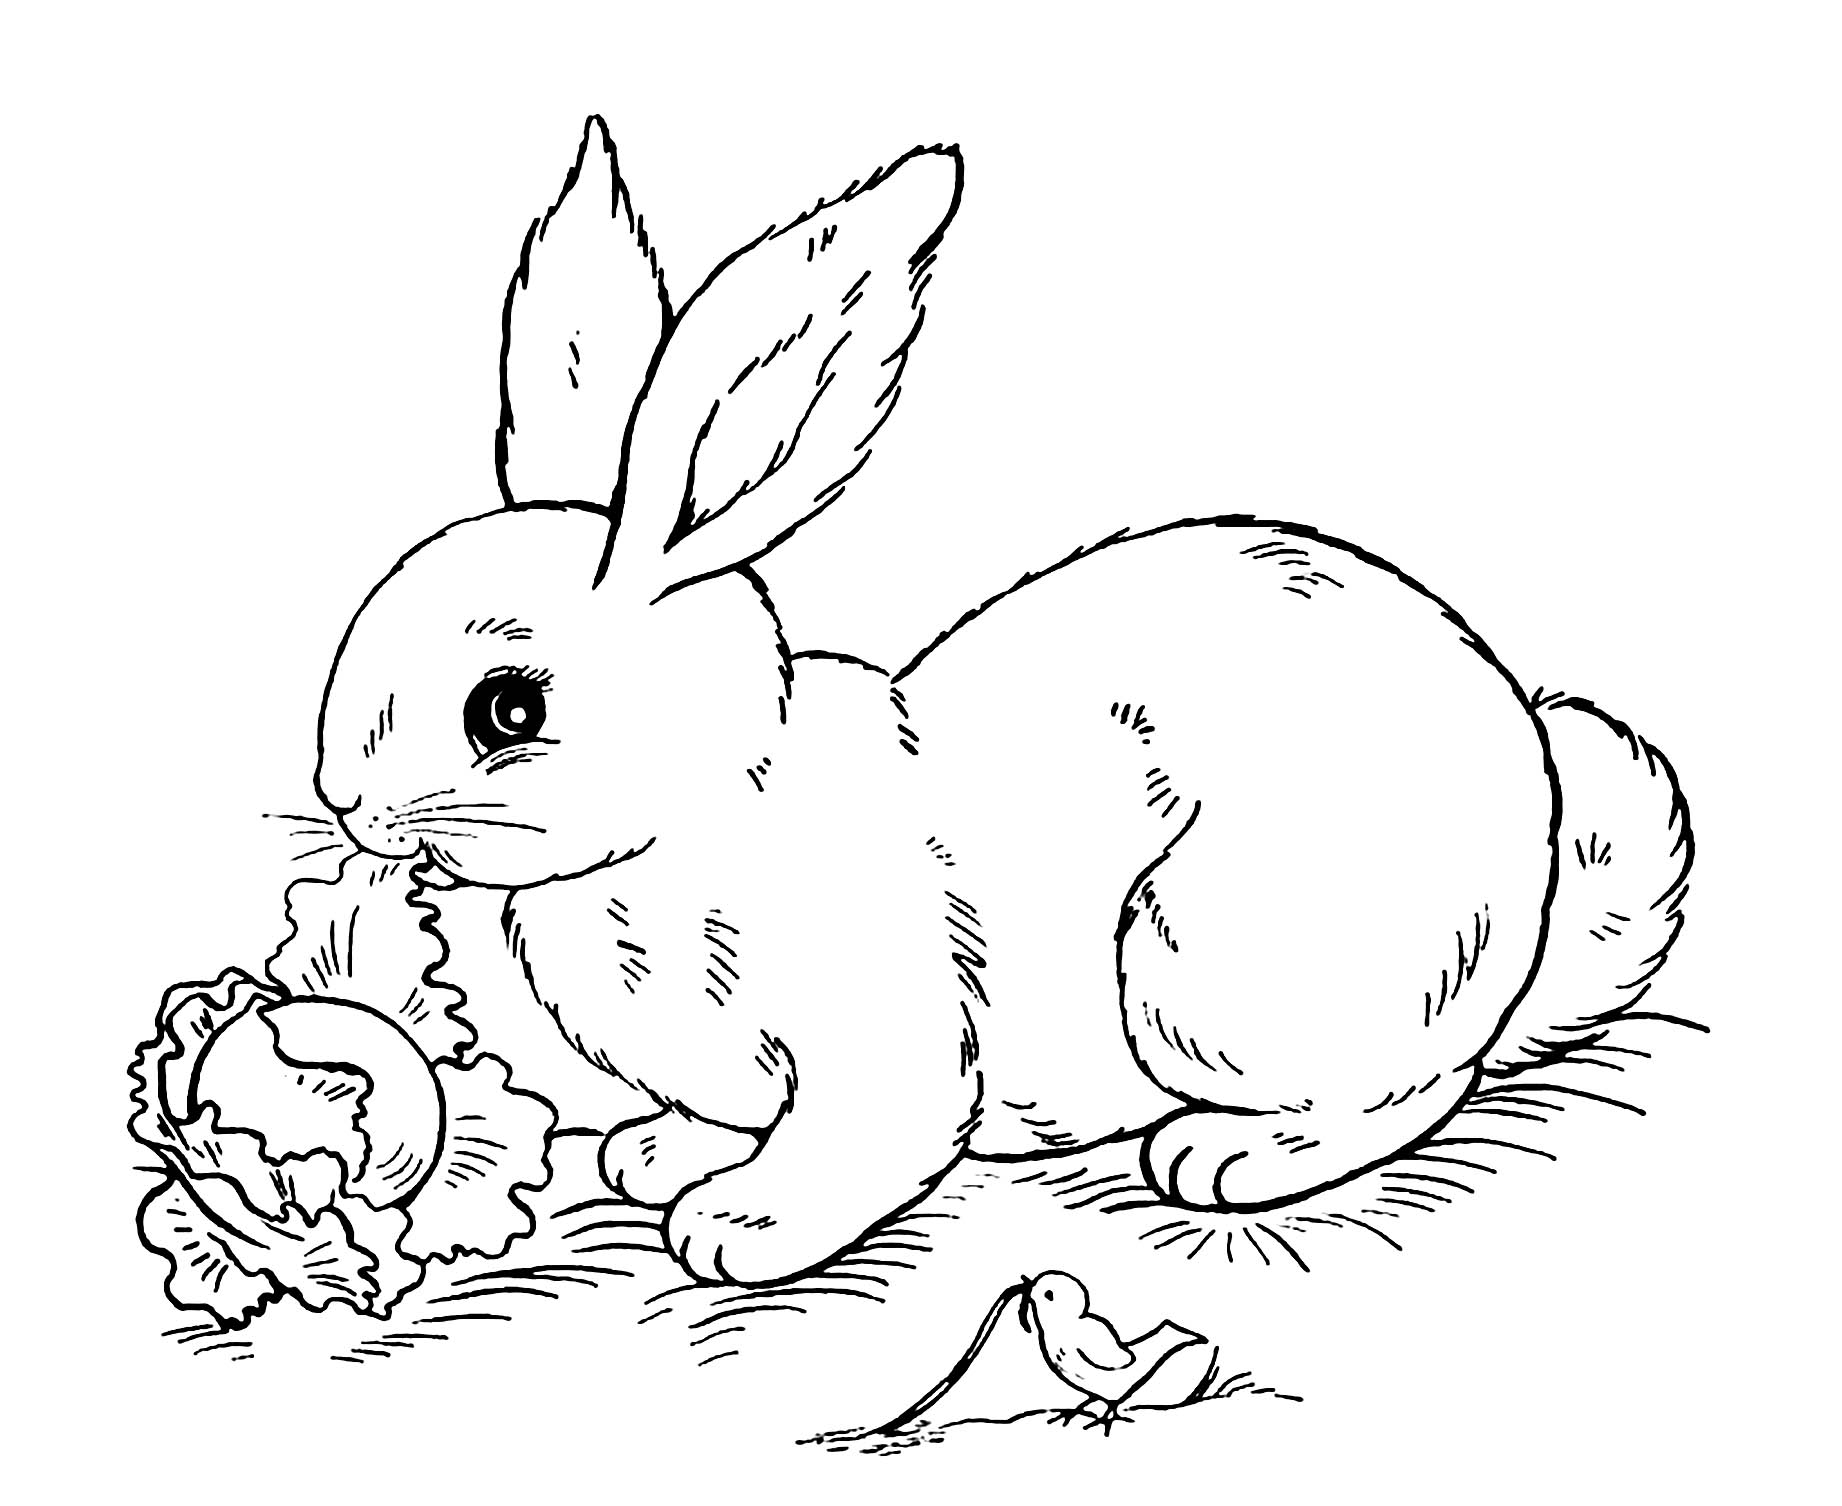 Image of rabbit to print and color - Rabbits & Bunnies Kids Coloring Pages